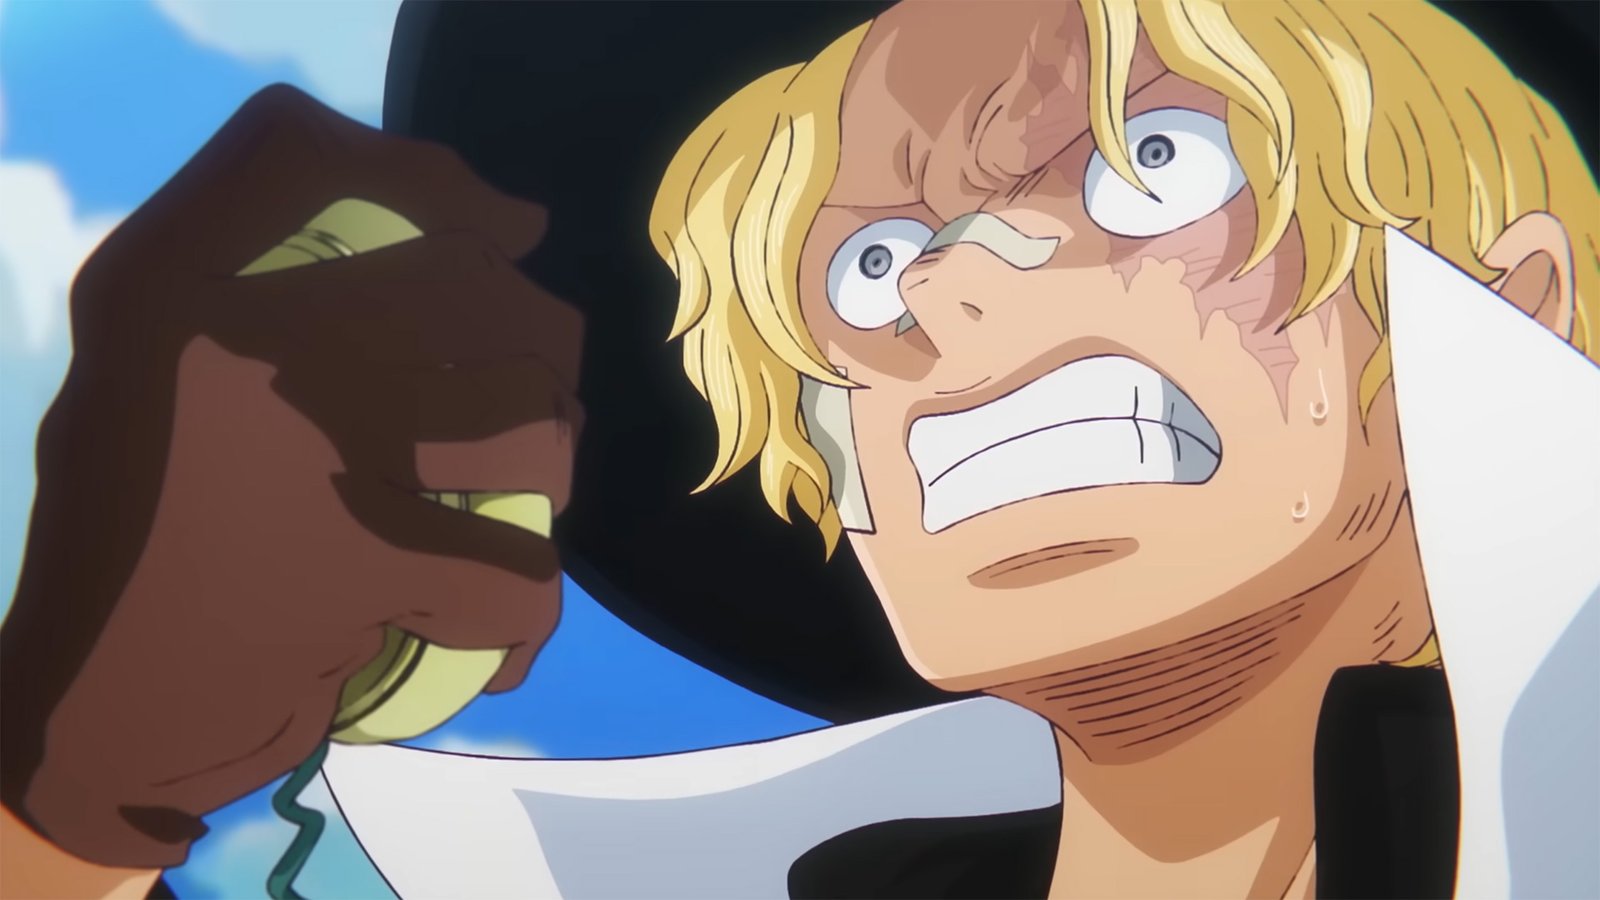 New images from One Piece's Egghead arc - picukitime